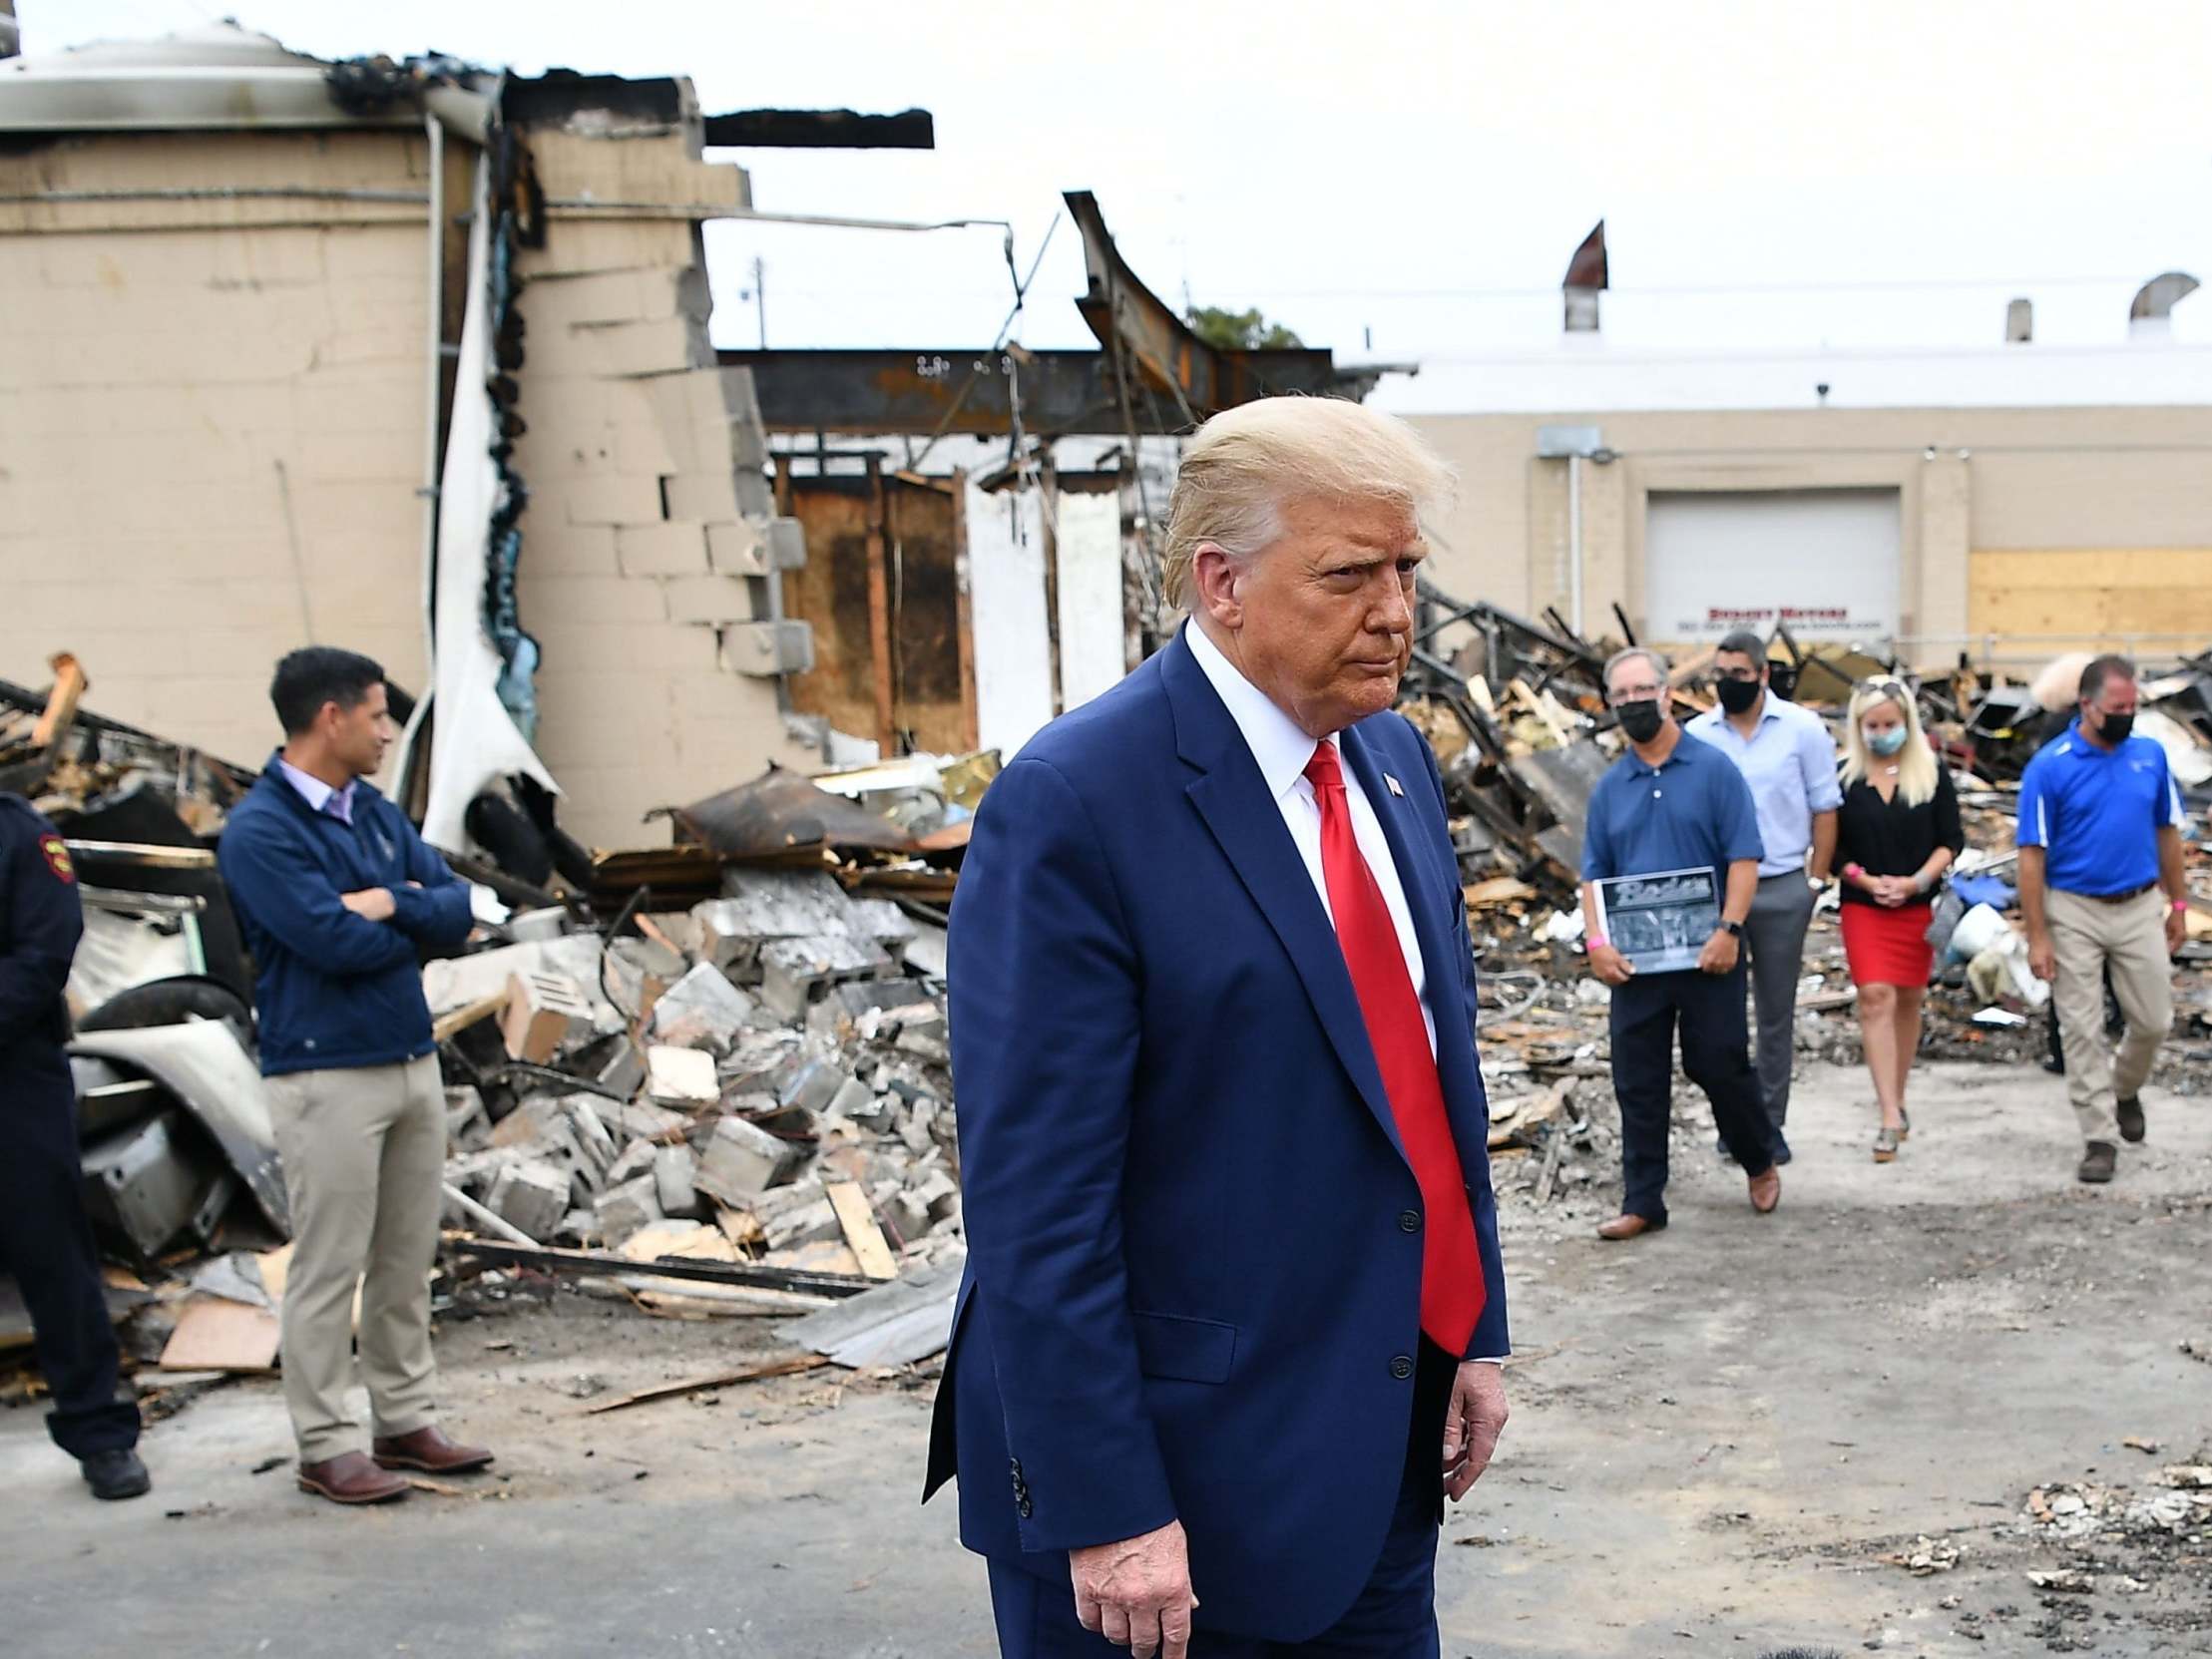 Donald Trump tours an area affected by civil unrest in Kenosha, Wisconsin, on 1 September 2020